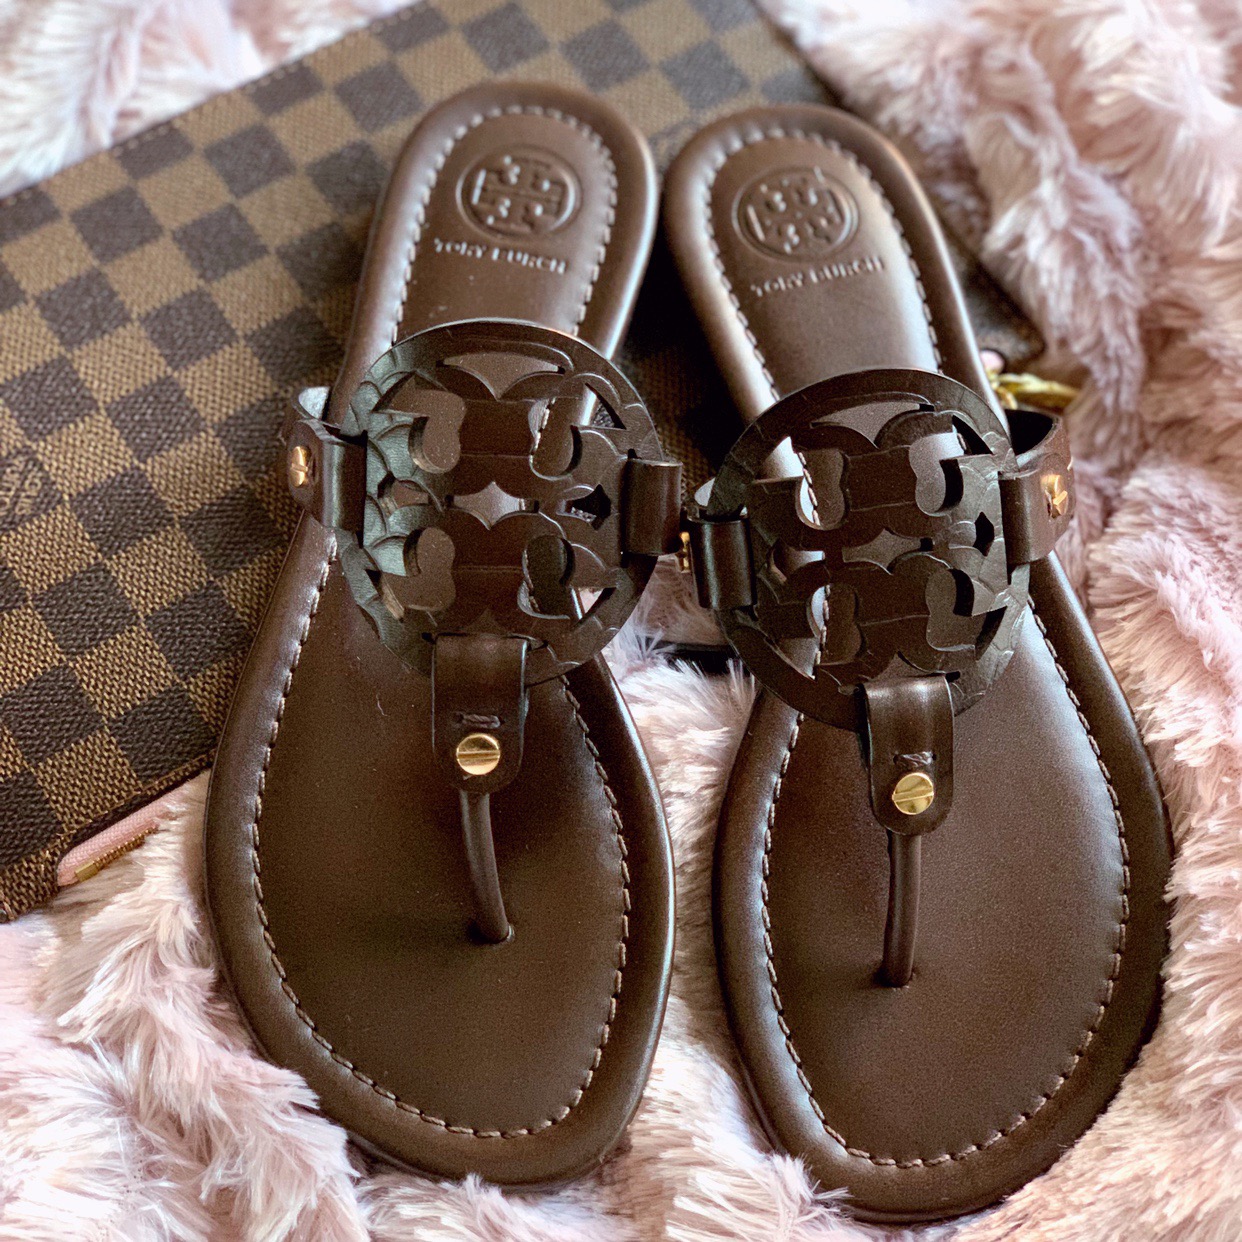 Tory Burch Miller Promo + Exclusive Colors Included! - The Double Take Girls